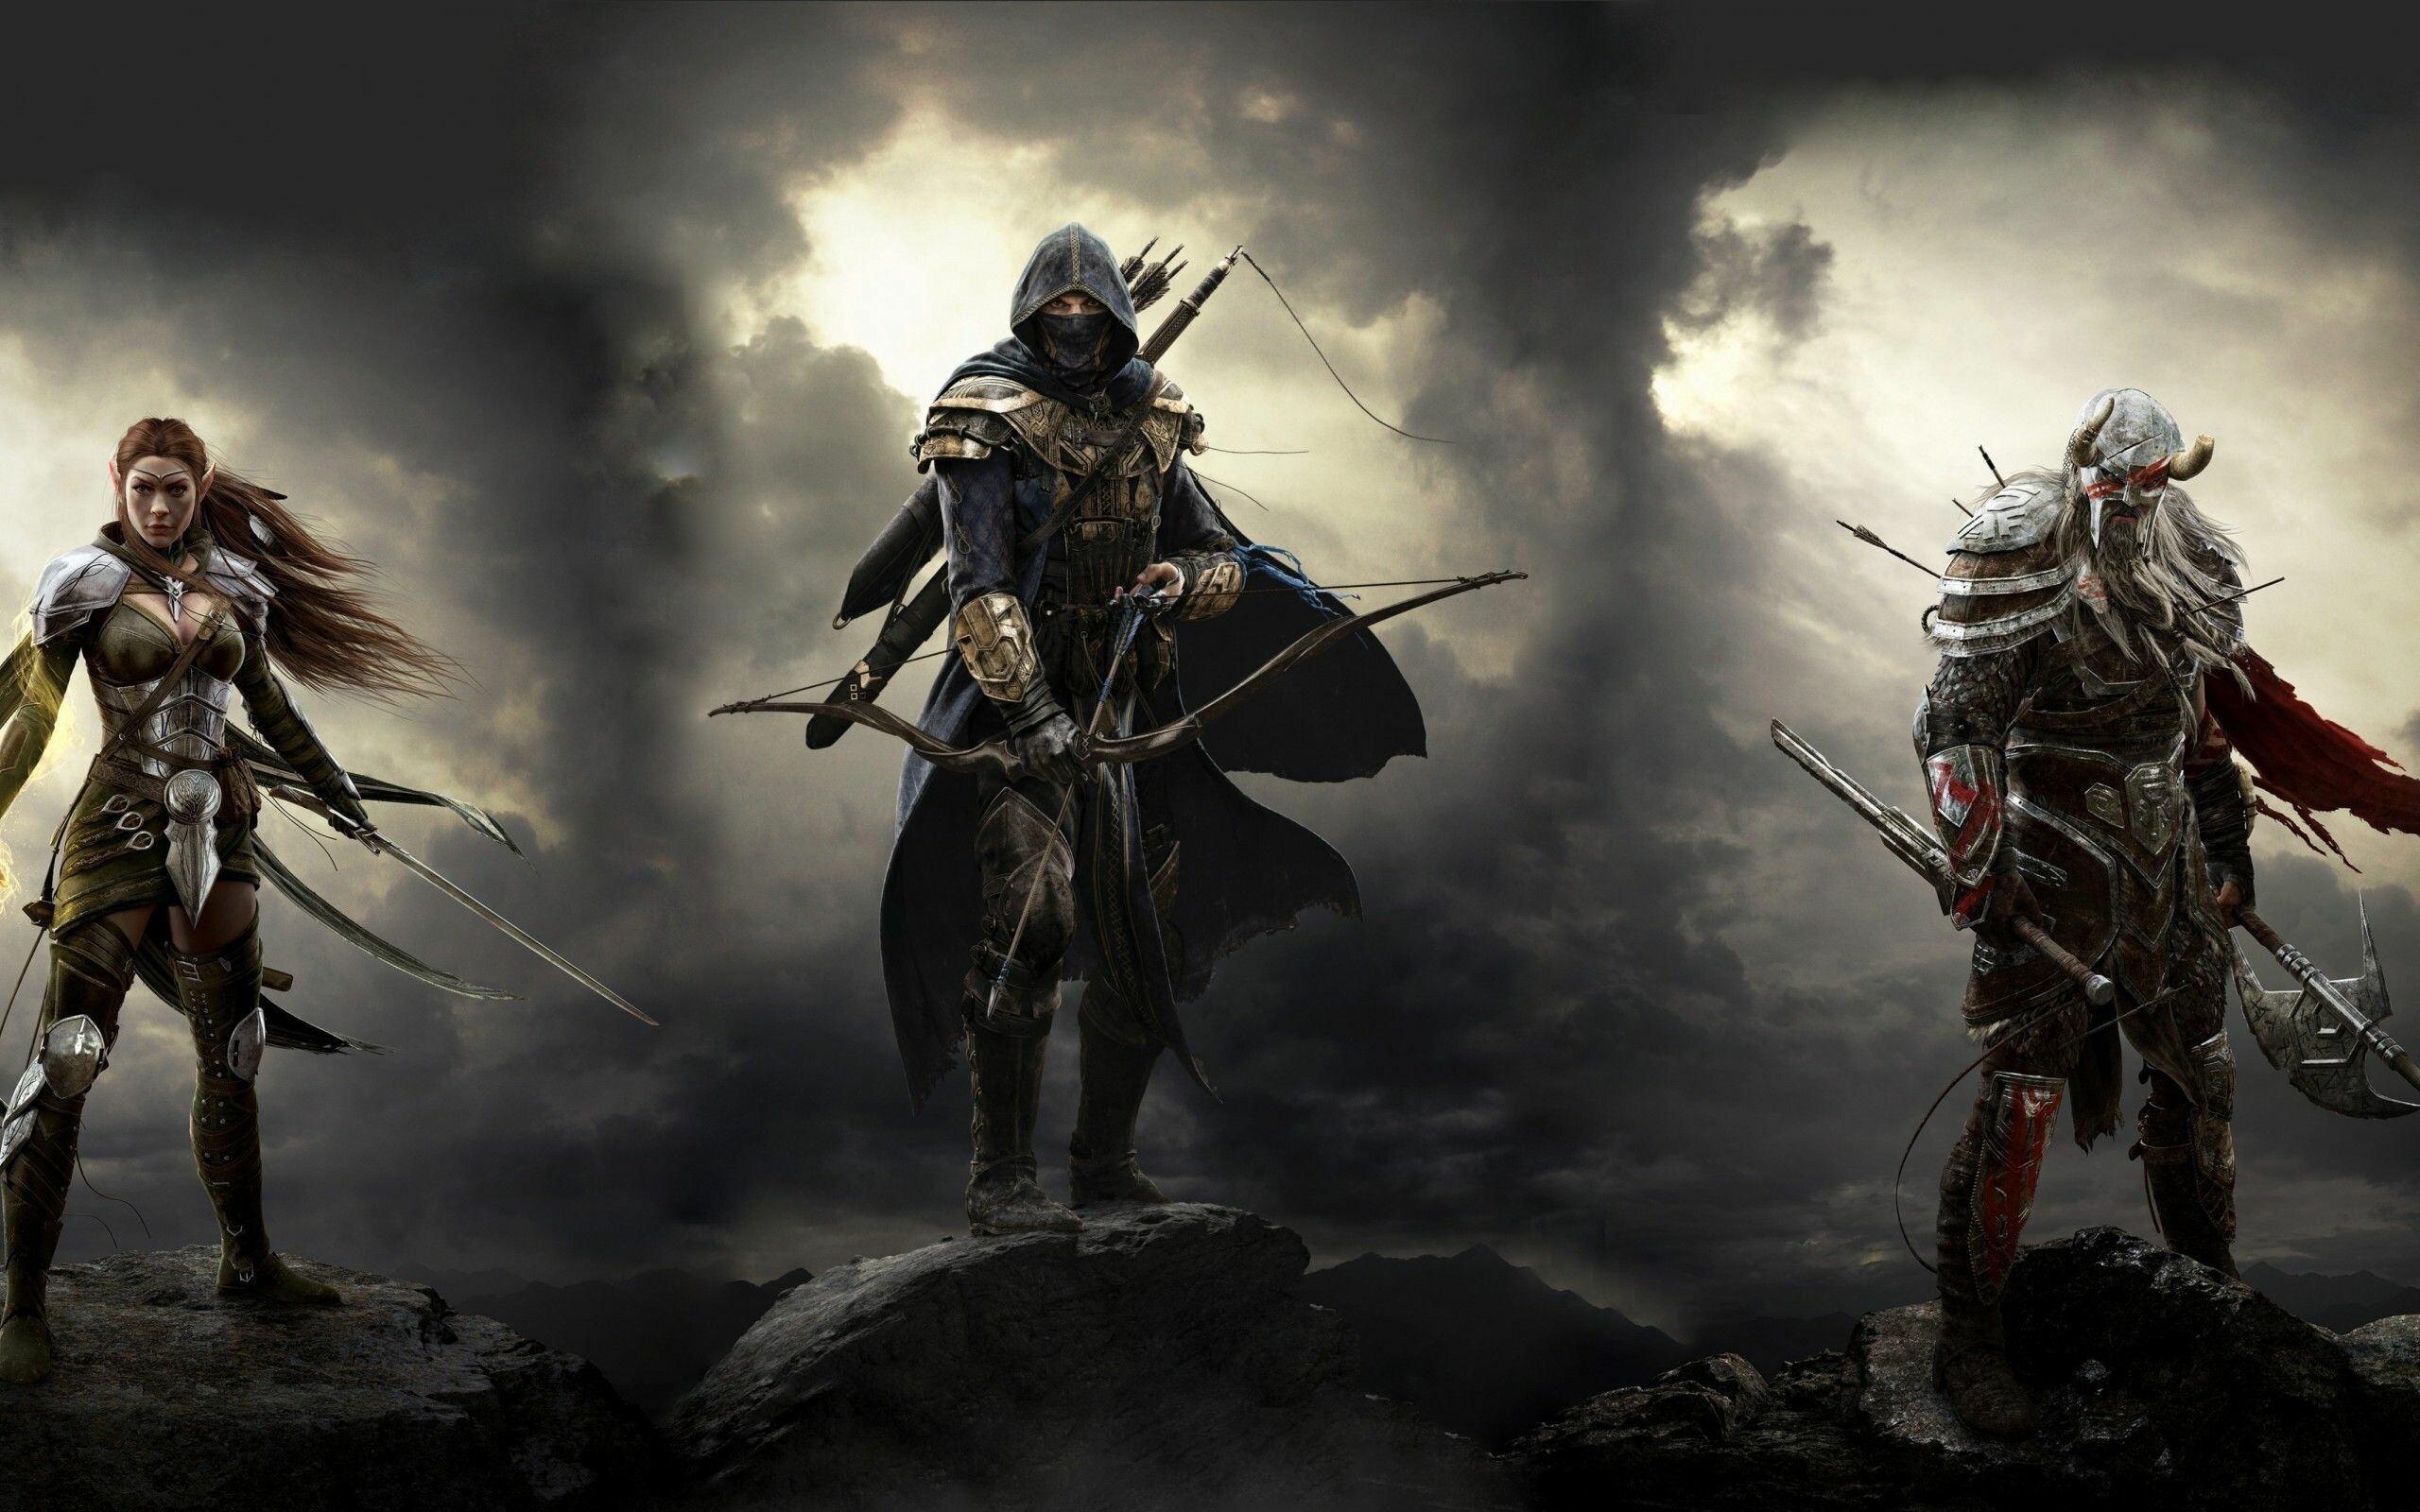 The Elder Scrolls: The series' fictional universe, Takes place on the continent of Tamriel. 2560x1600 HD Wallpaper.